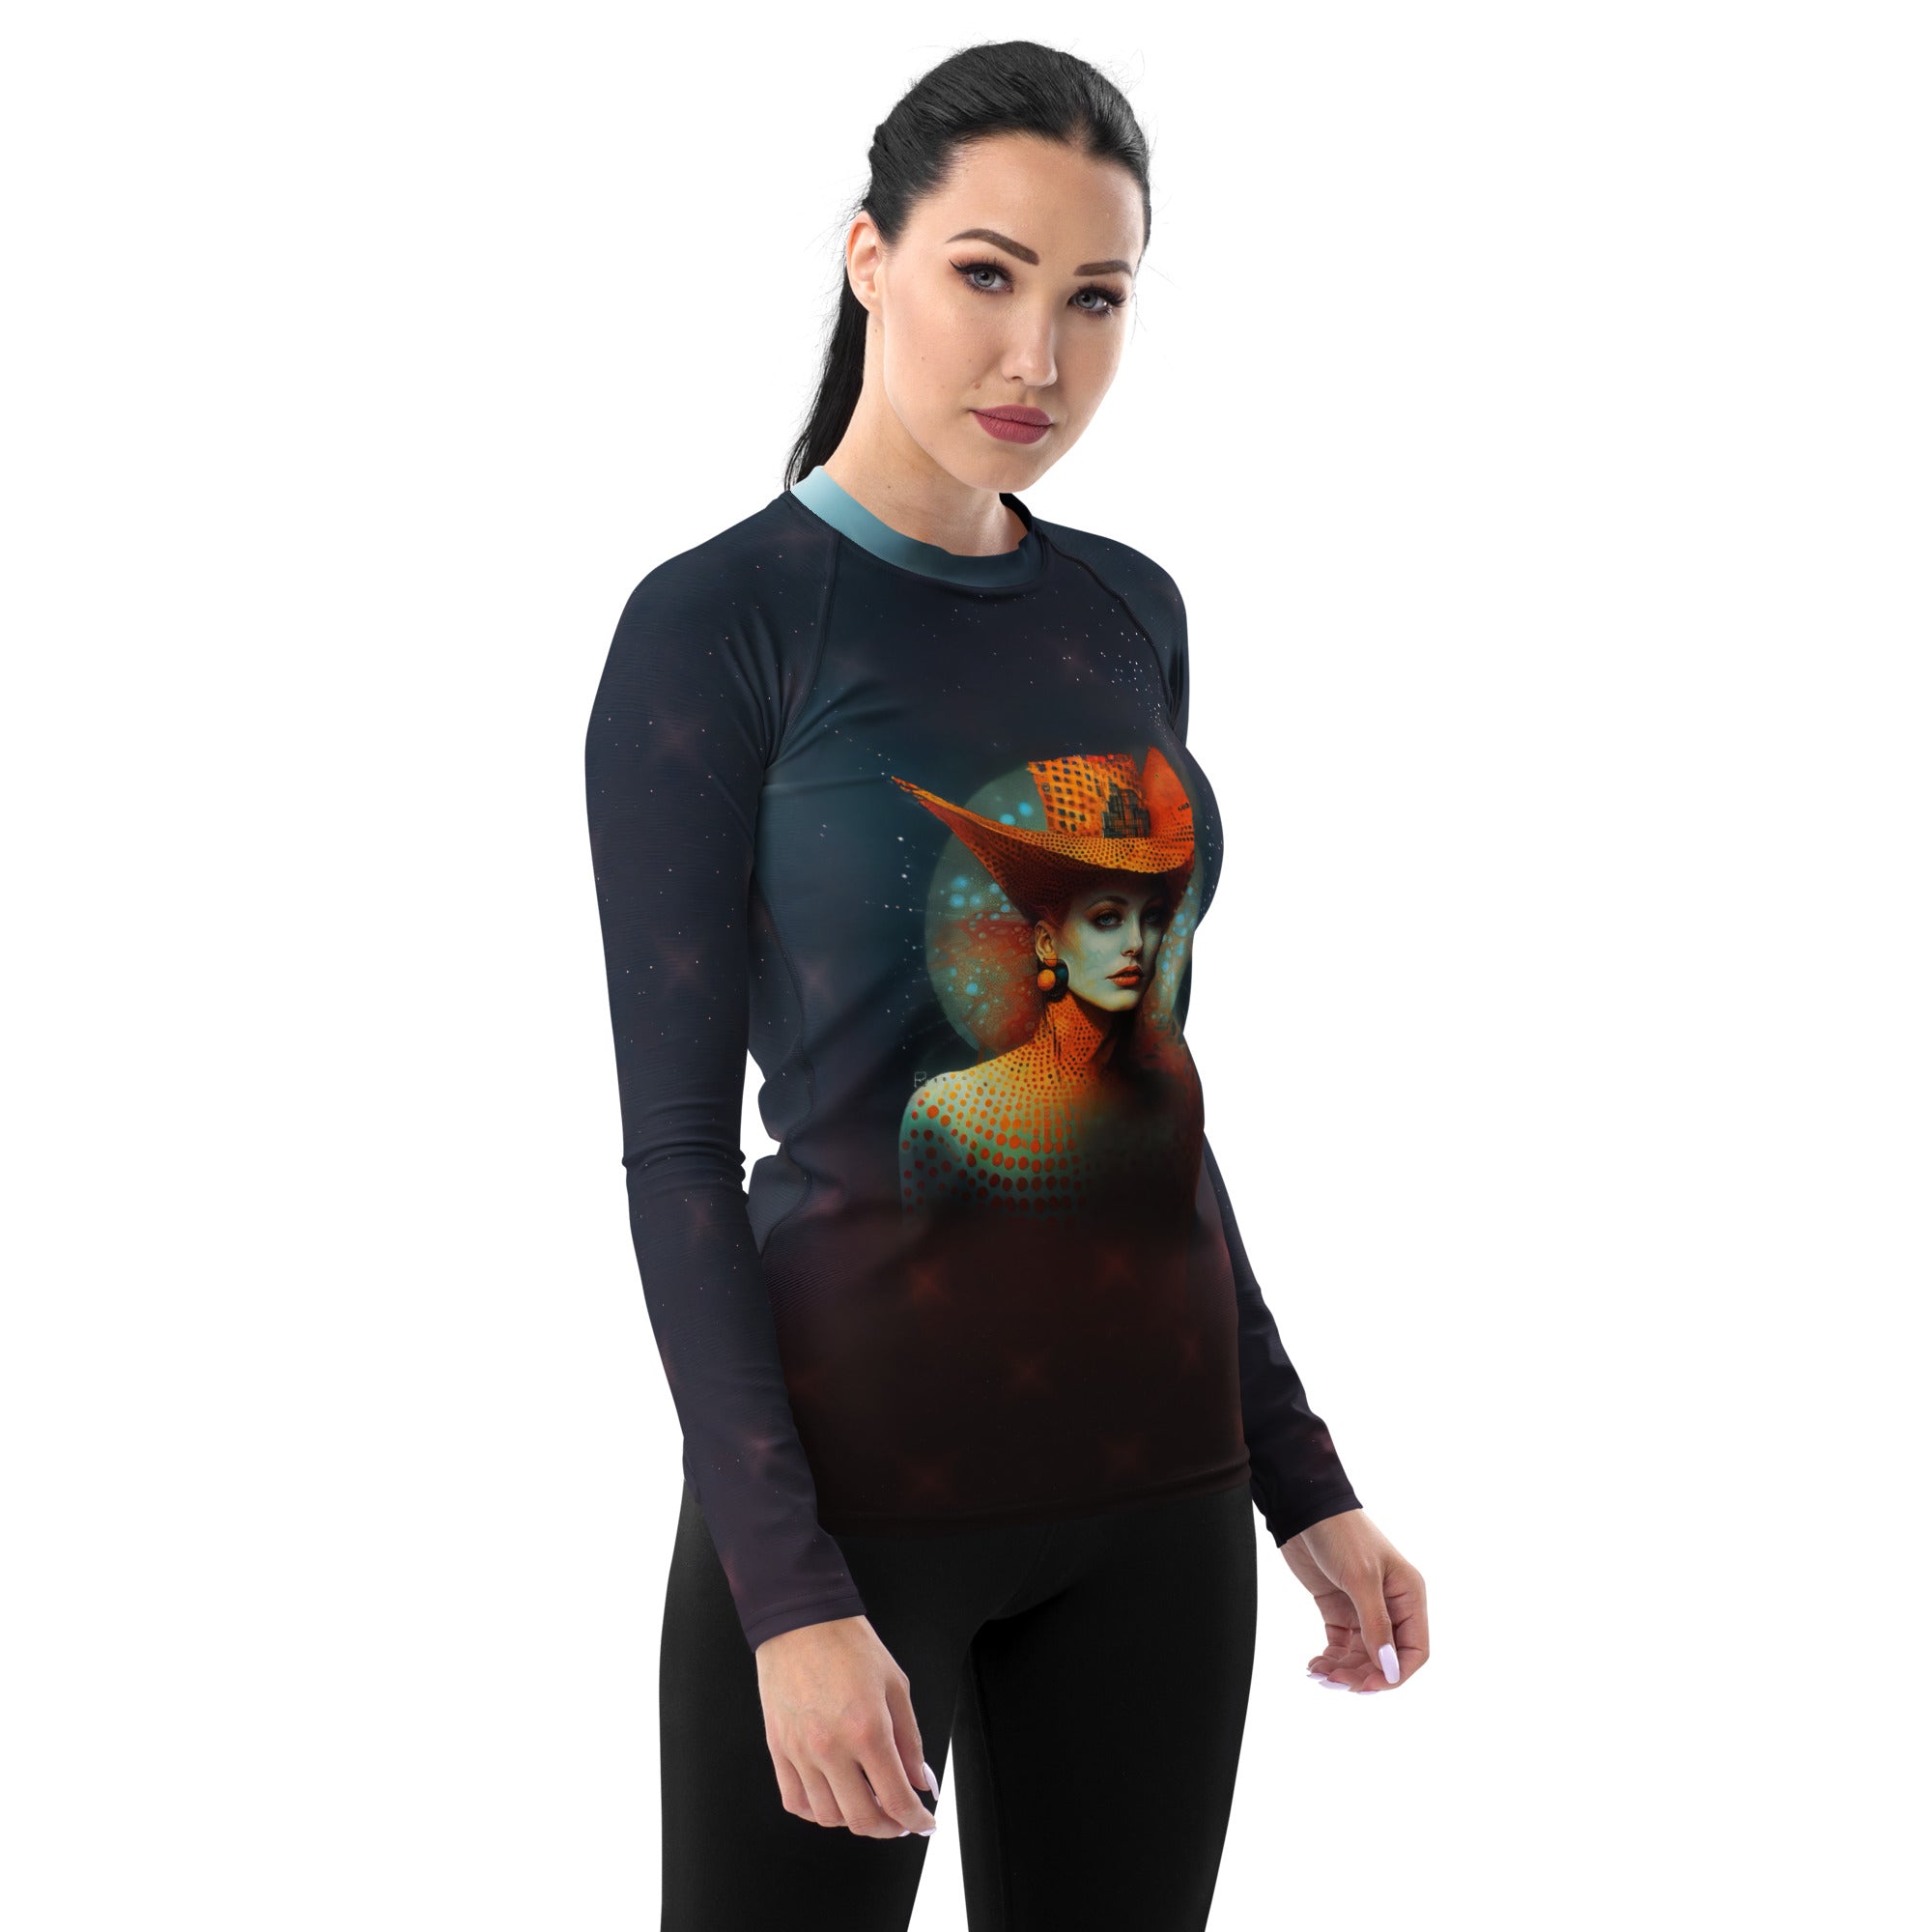 Back view of the Galactic Expedition Women's Rash Guard, showcasing fit.